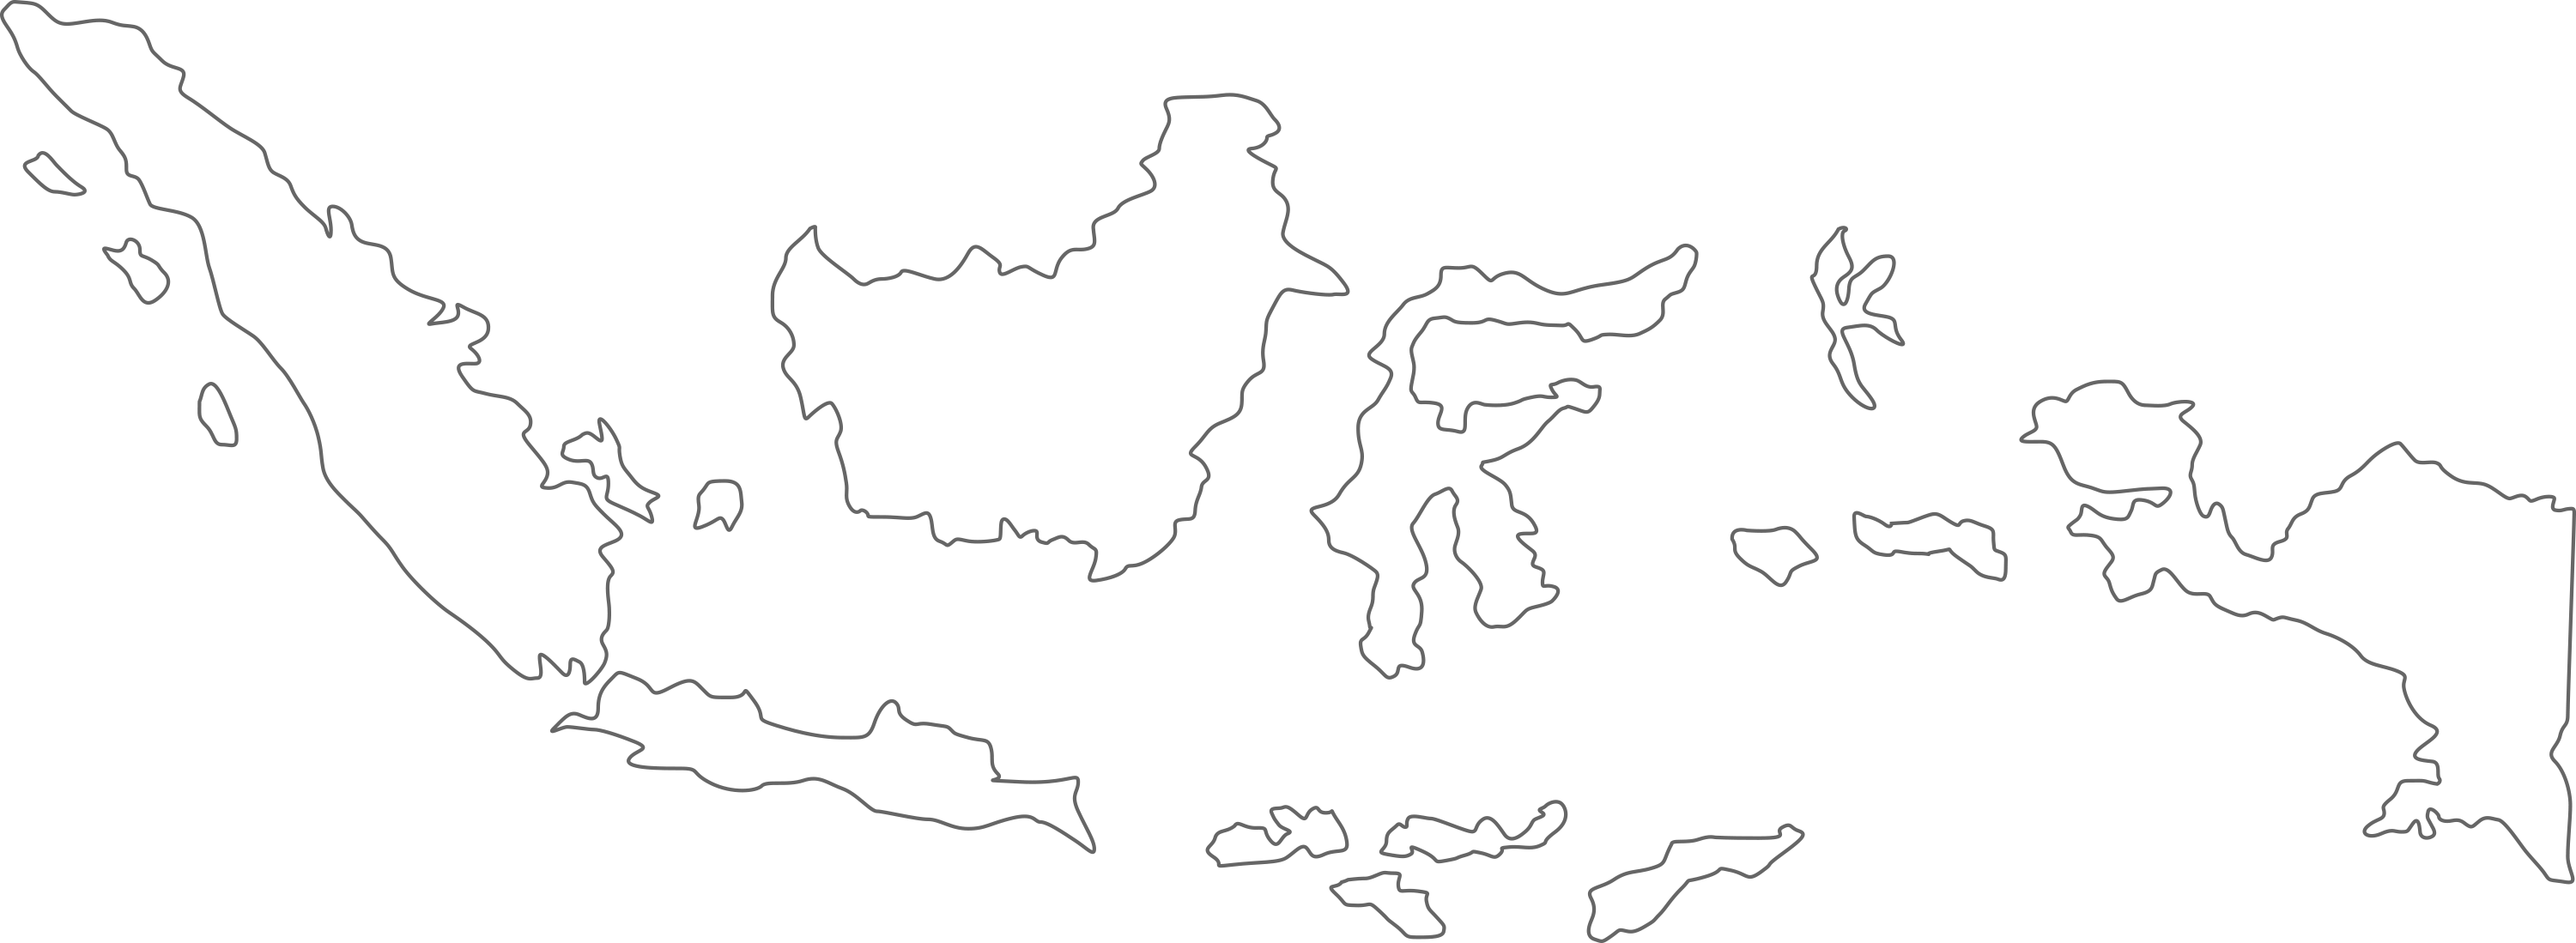 Indonesia Outline Map PNG